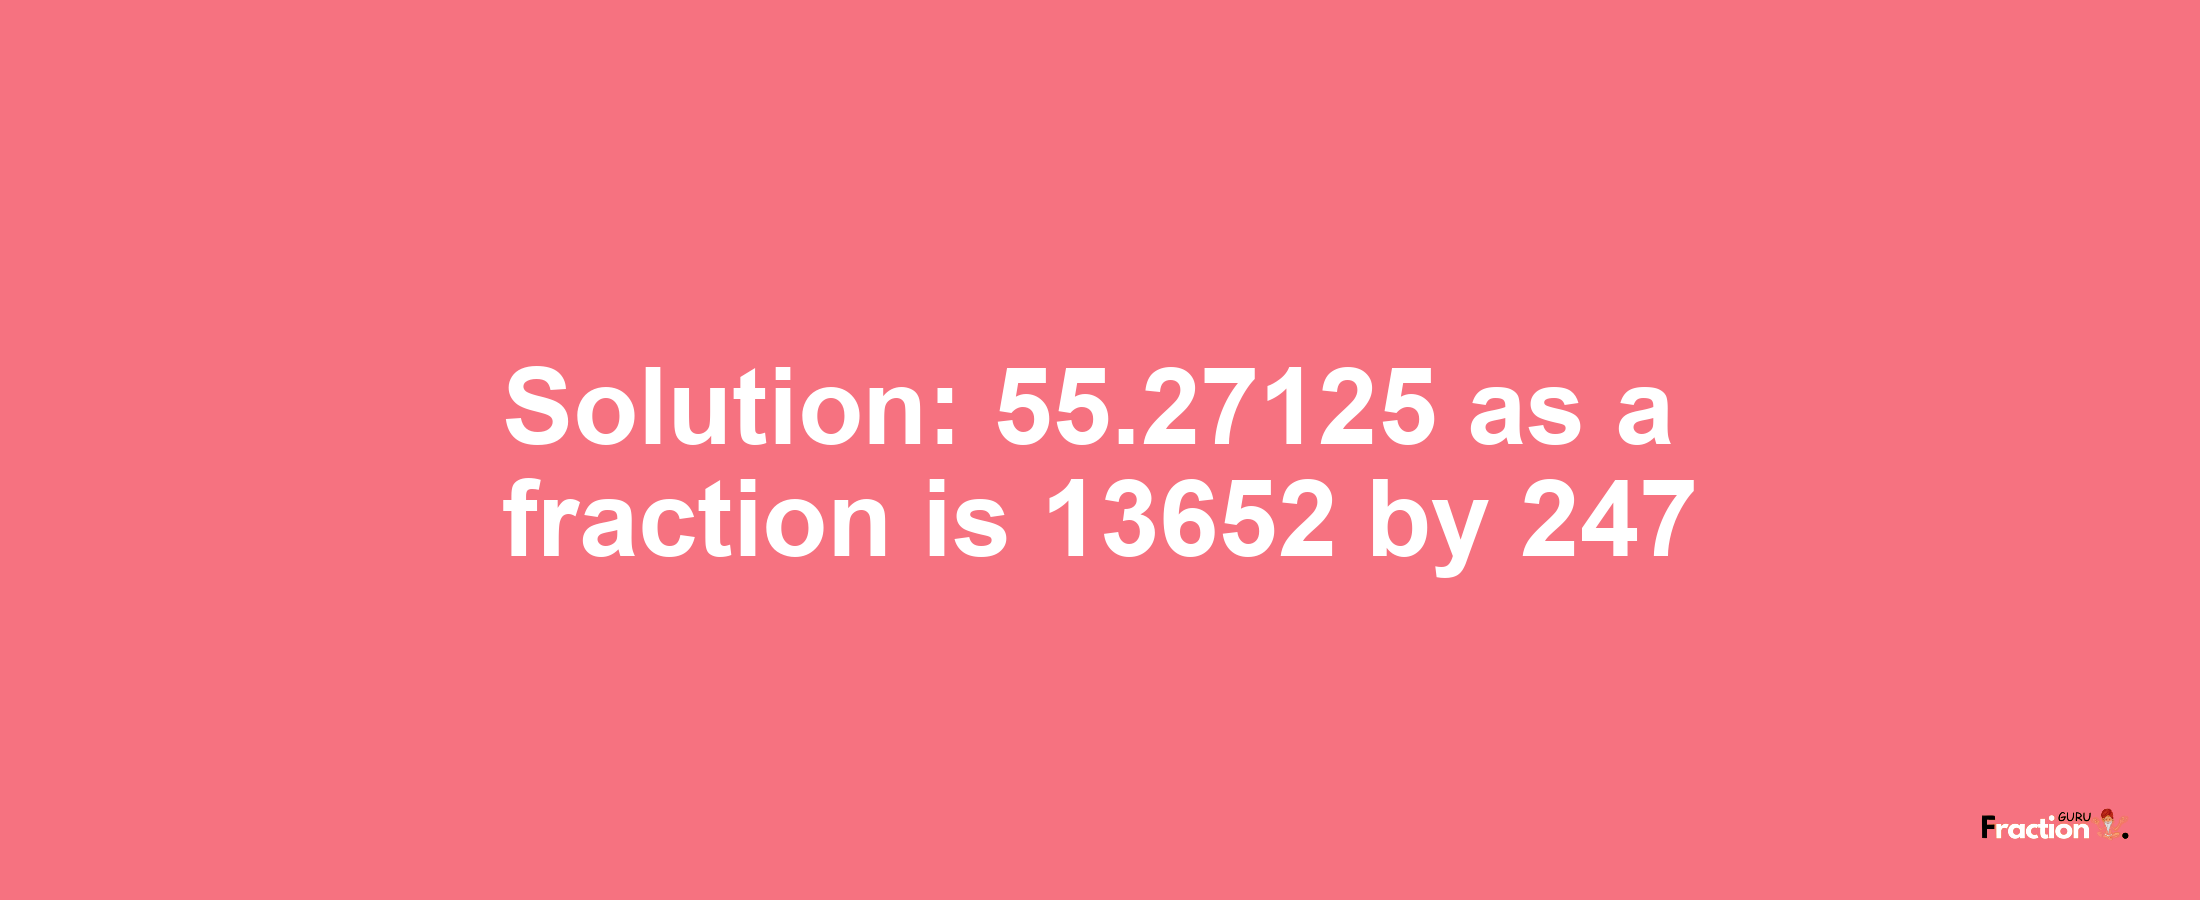 Solution:55.27125 as a fraction is 13652/247